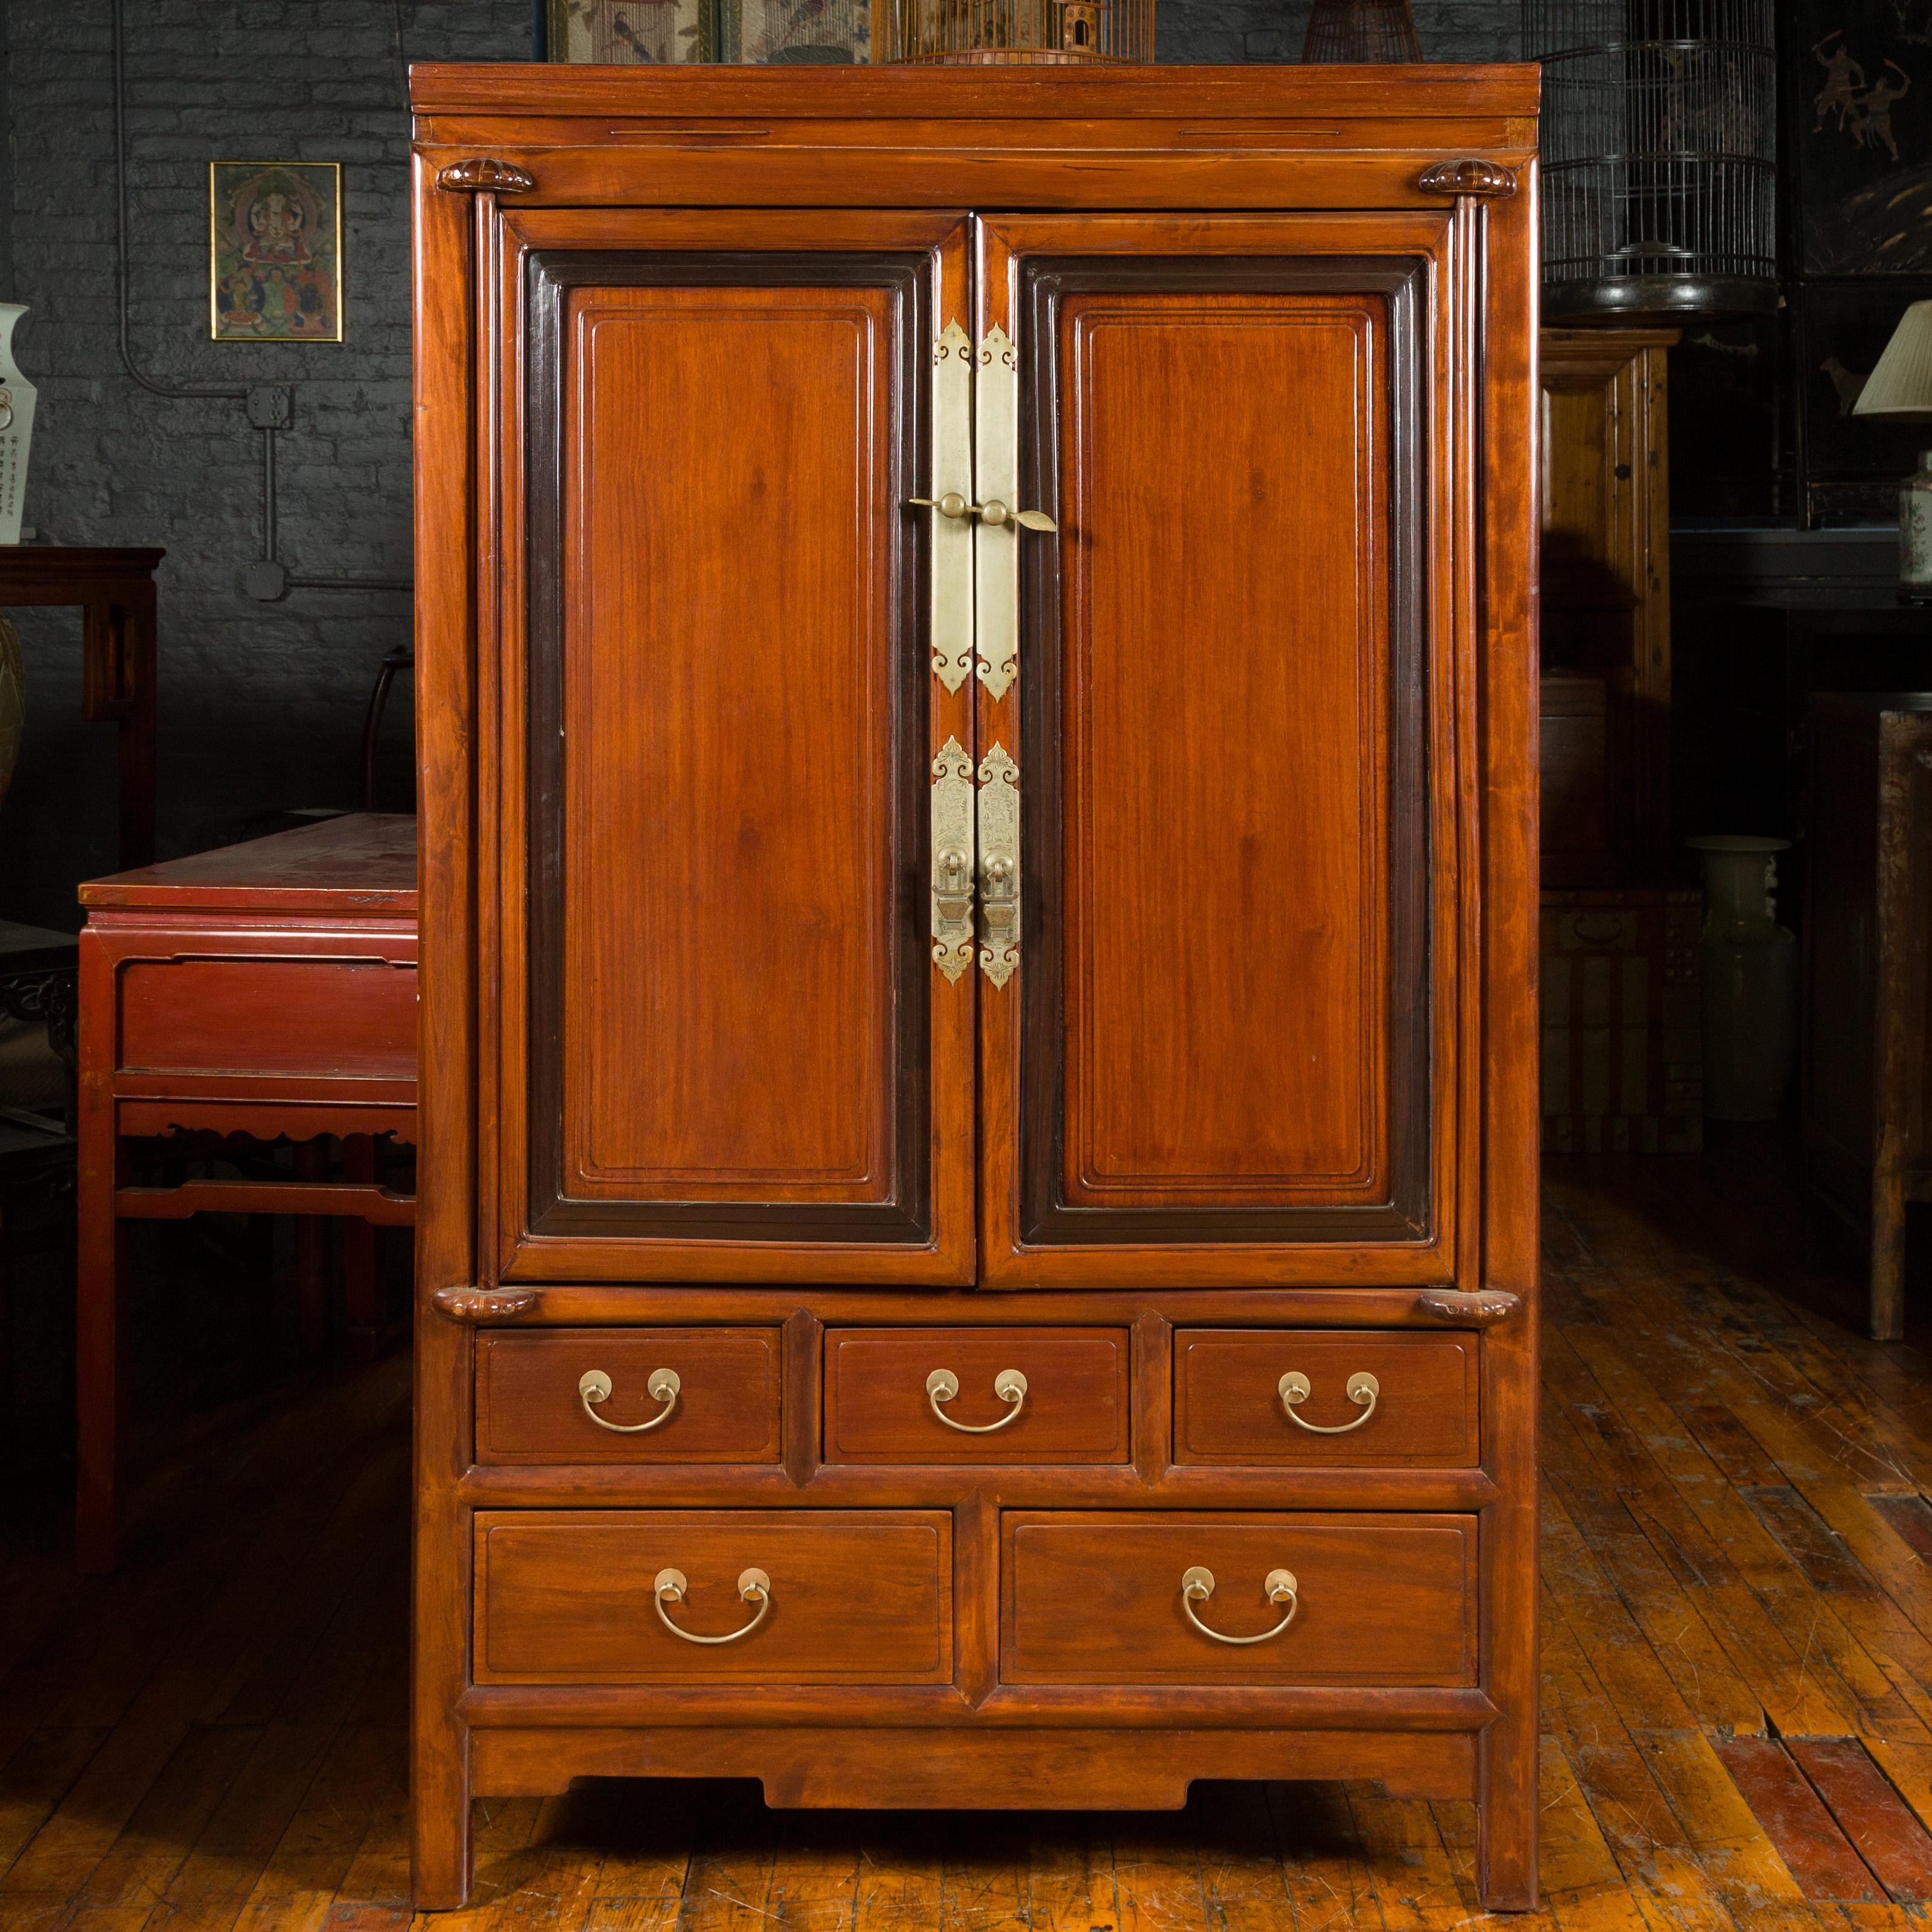 A Chinese two-toned cabinet from the 20th century, with doors and drawers. Created in China during the 20th century, this tall cabinet features two doors, adorned with dark inner molding contrasting beautifully with the rest of the structure. Fitted